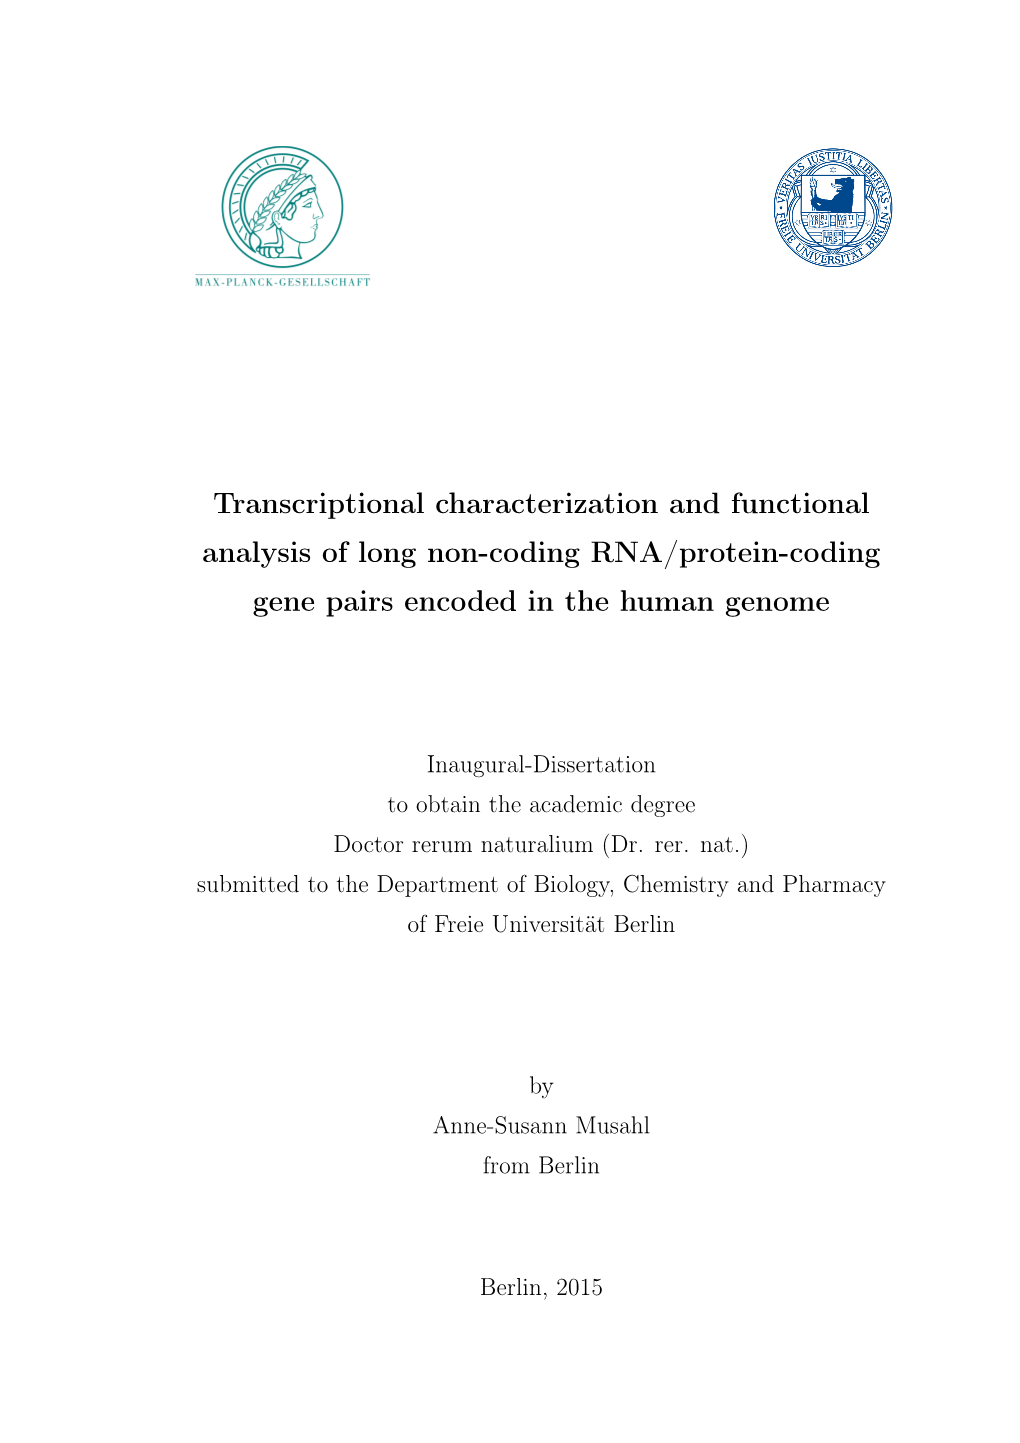 Transcriptional Characterization and Functional Analysis of Long Non-Coding RNA/Protein-Coding Gene Pairs Encoded in the Human Genome